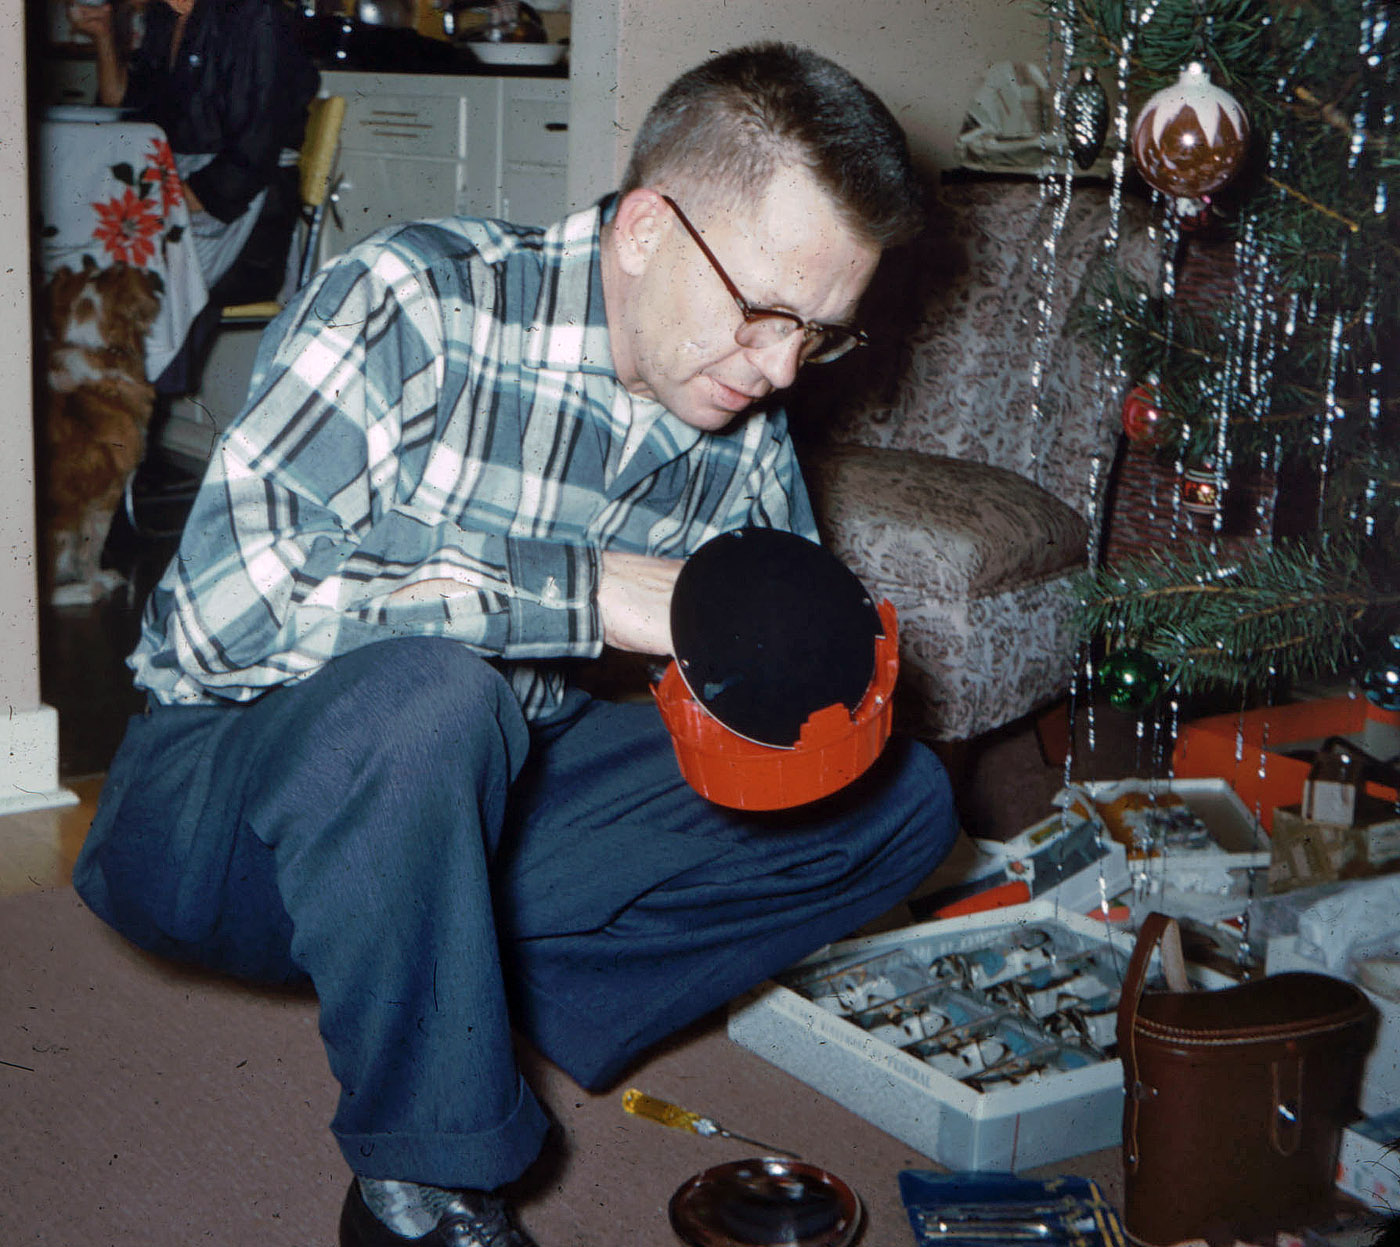 In 1959, my engineer father was, as his expression shows, not happy that a part to my brother's new magic set was not working by late Christmas morning. This was my second picture with the Argus C-Twenty camera I received that day so long ago. For $29.95, the camera kit came with one 20-exposure roll of Kodachrome daylight, six No. 5 blue flashbulbs, plug-in flash gun, and a slide previewer.  My parents spent an extra $4.79 for the top-grain leather case. For some reason, they never discarded the Fall-Winter 1959 Montgomery-Ward catalog in which the camera was featured. The catalog is now in my home. The camera served me well through high school, college and beyond. View full size.